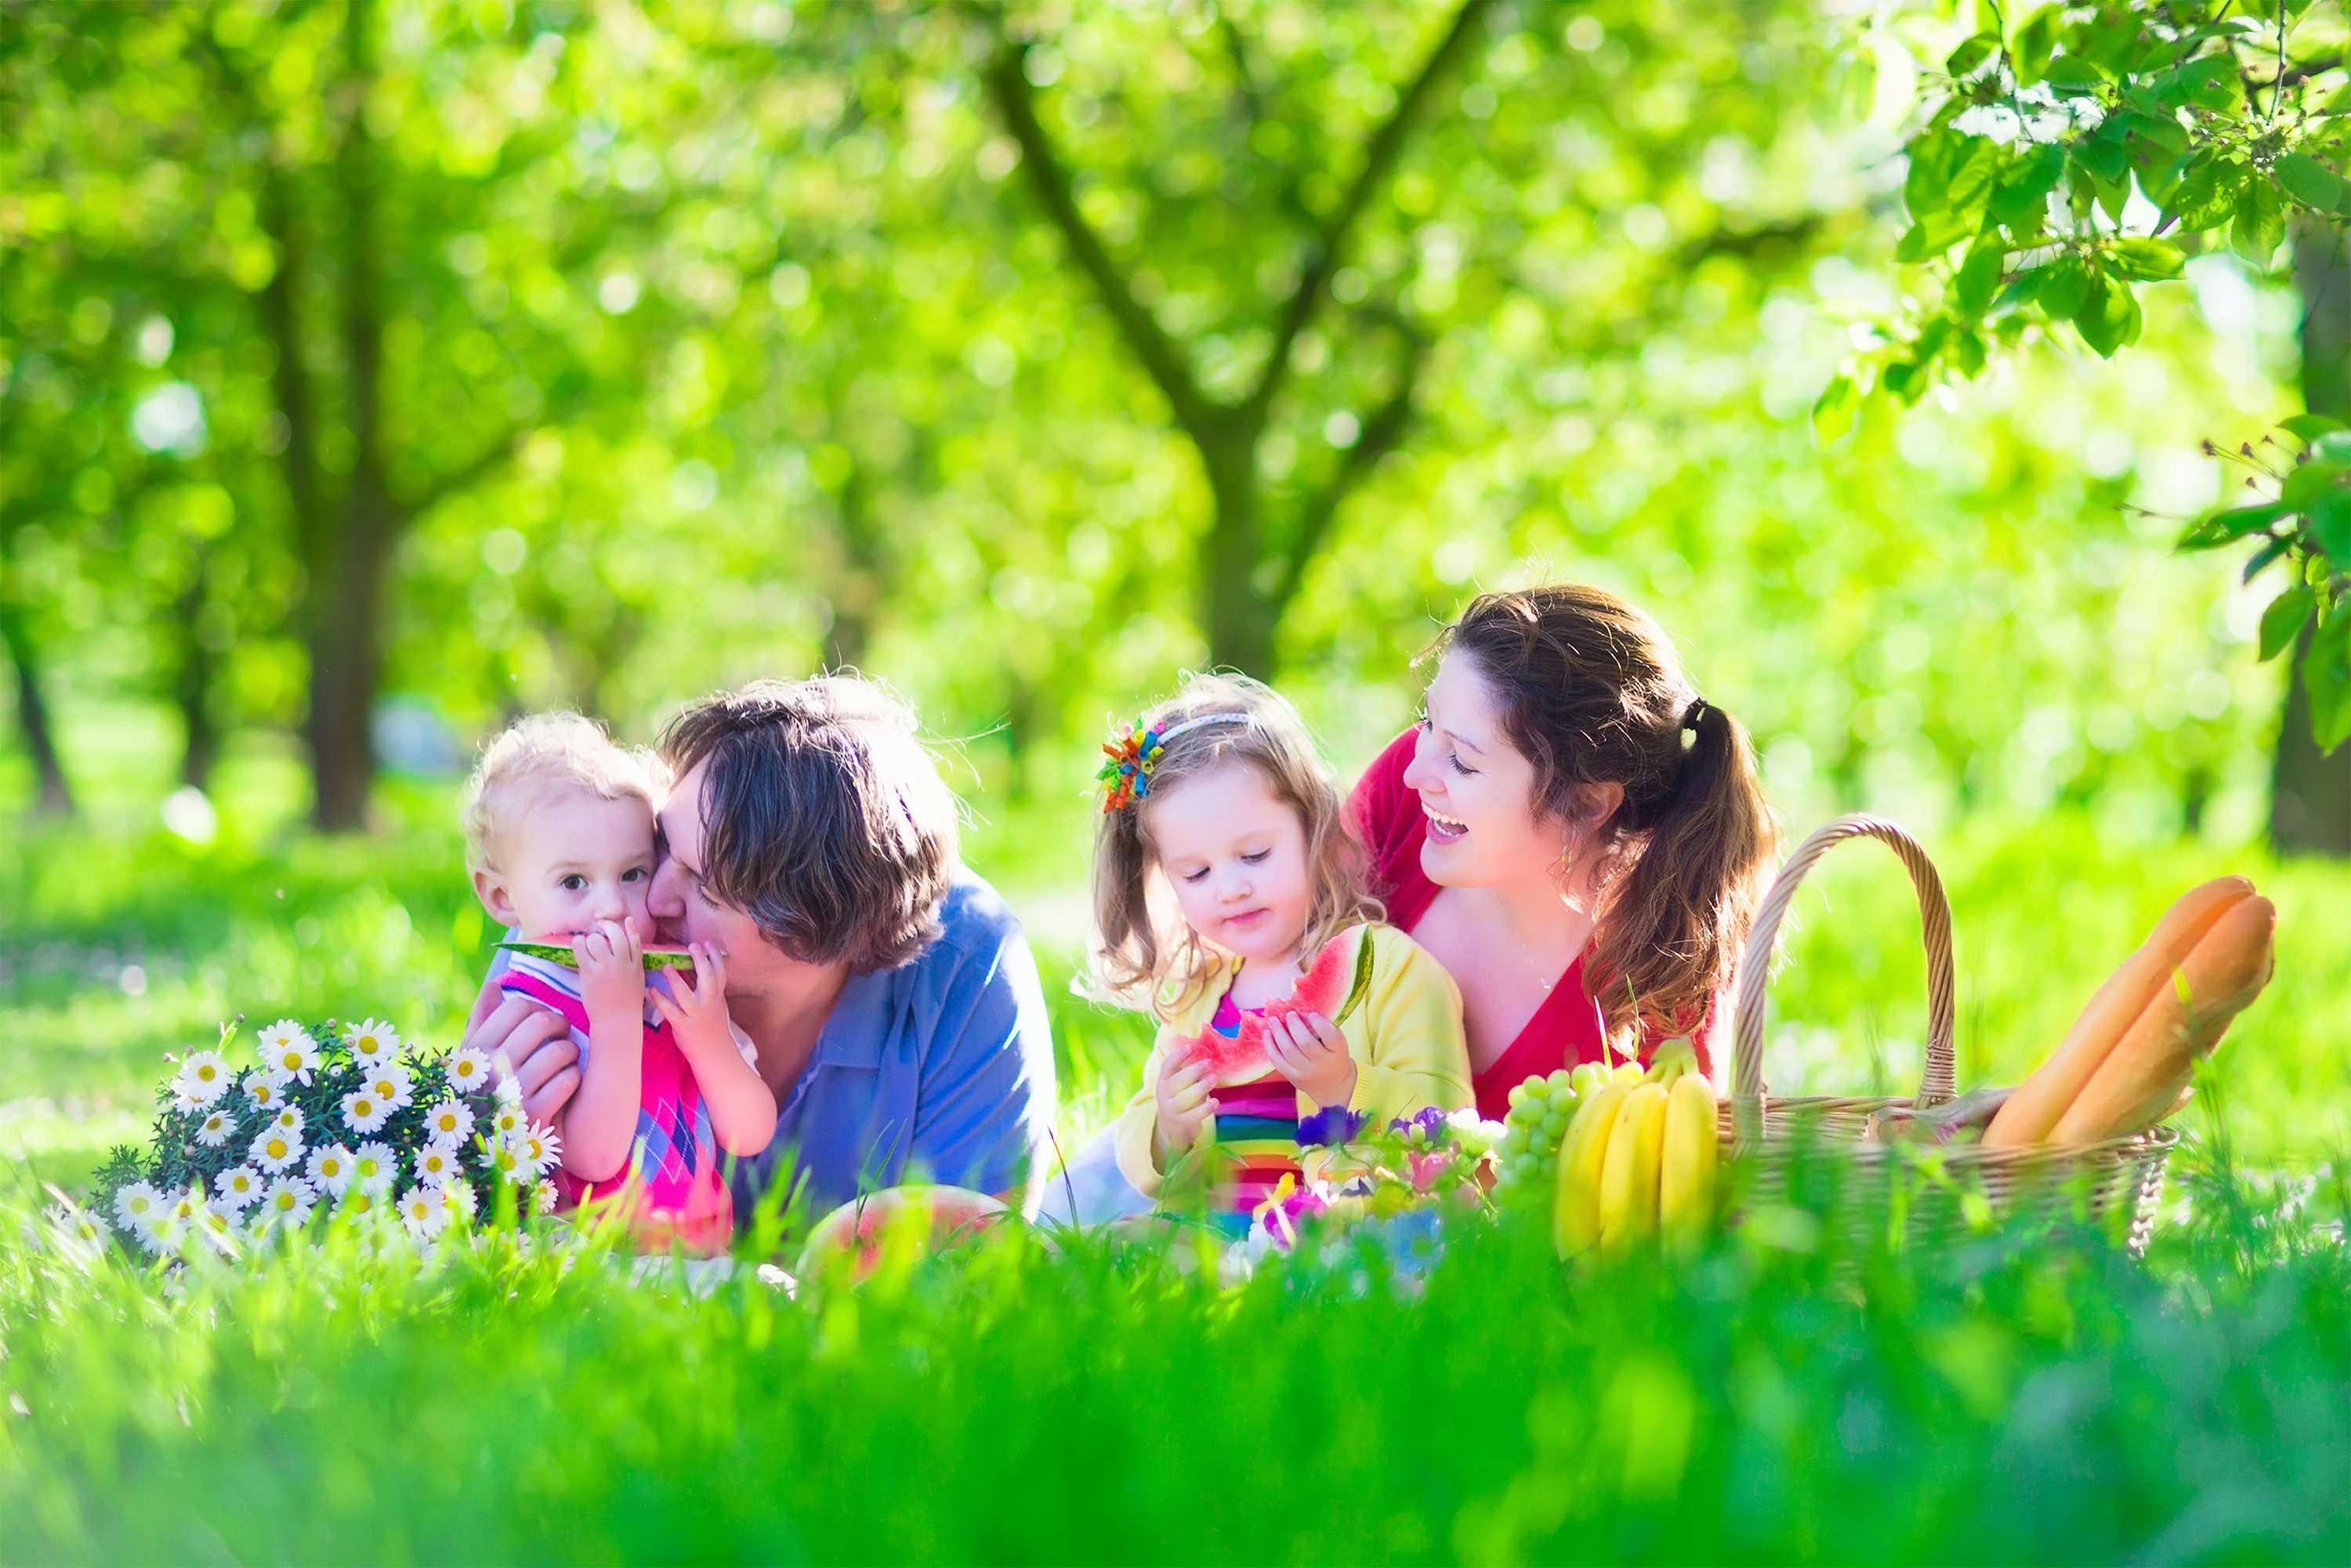 5 Practical Tips to Promote a Nutritional Mindset for the Whole Family